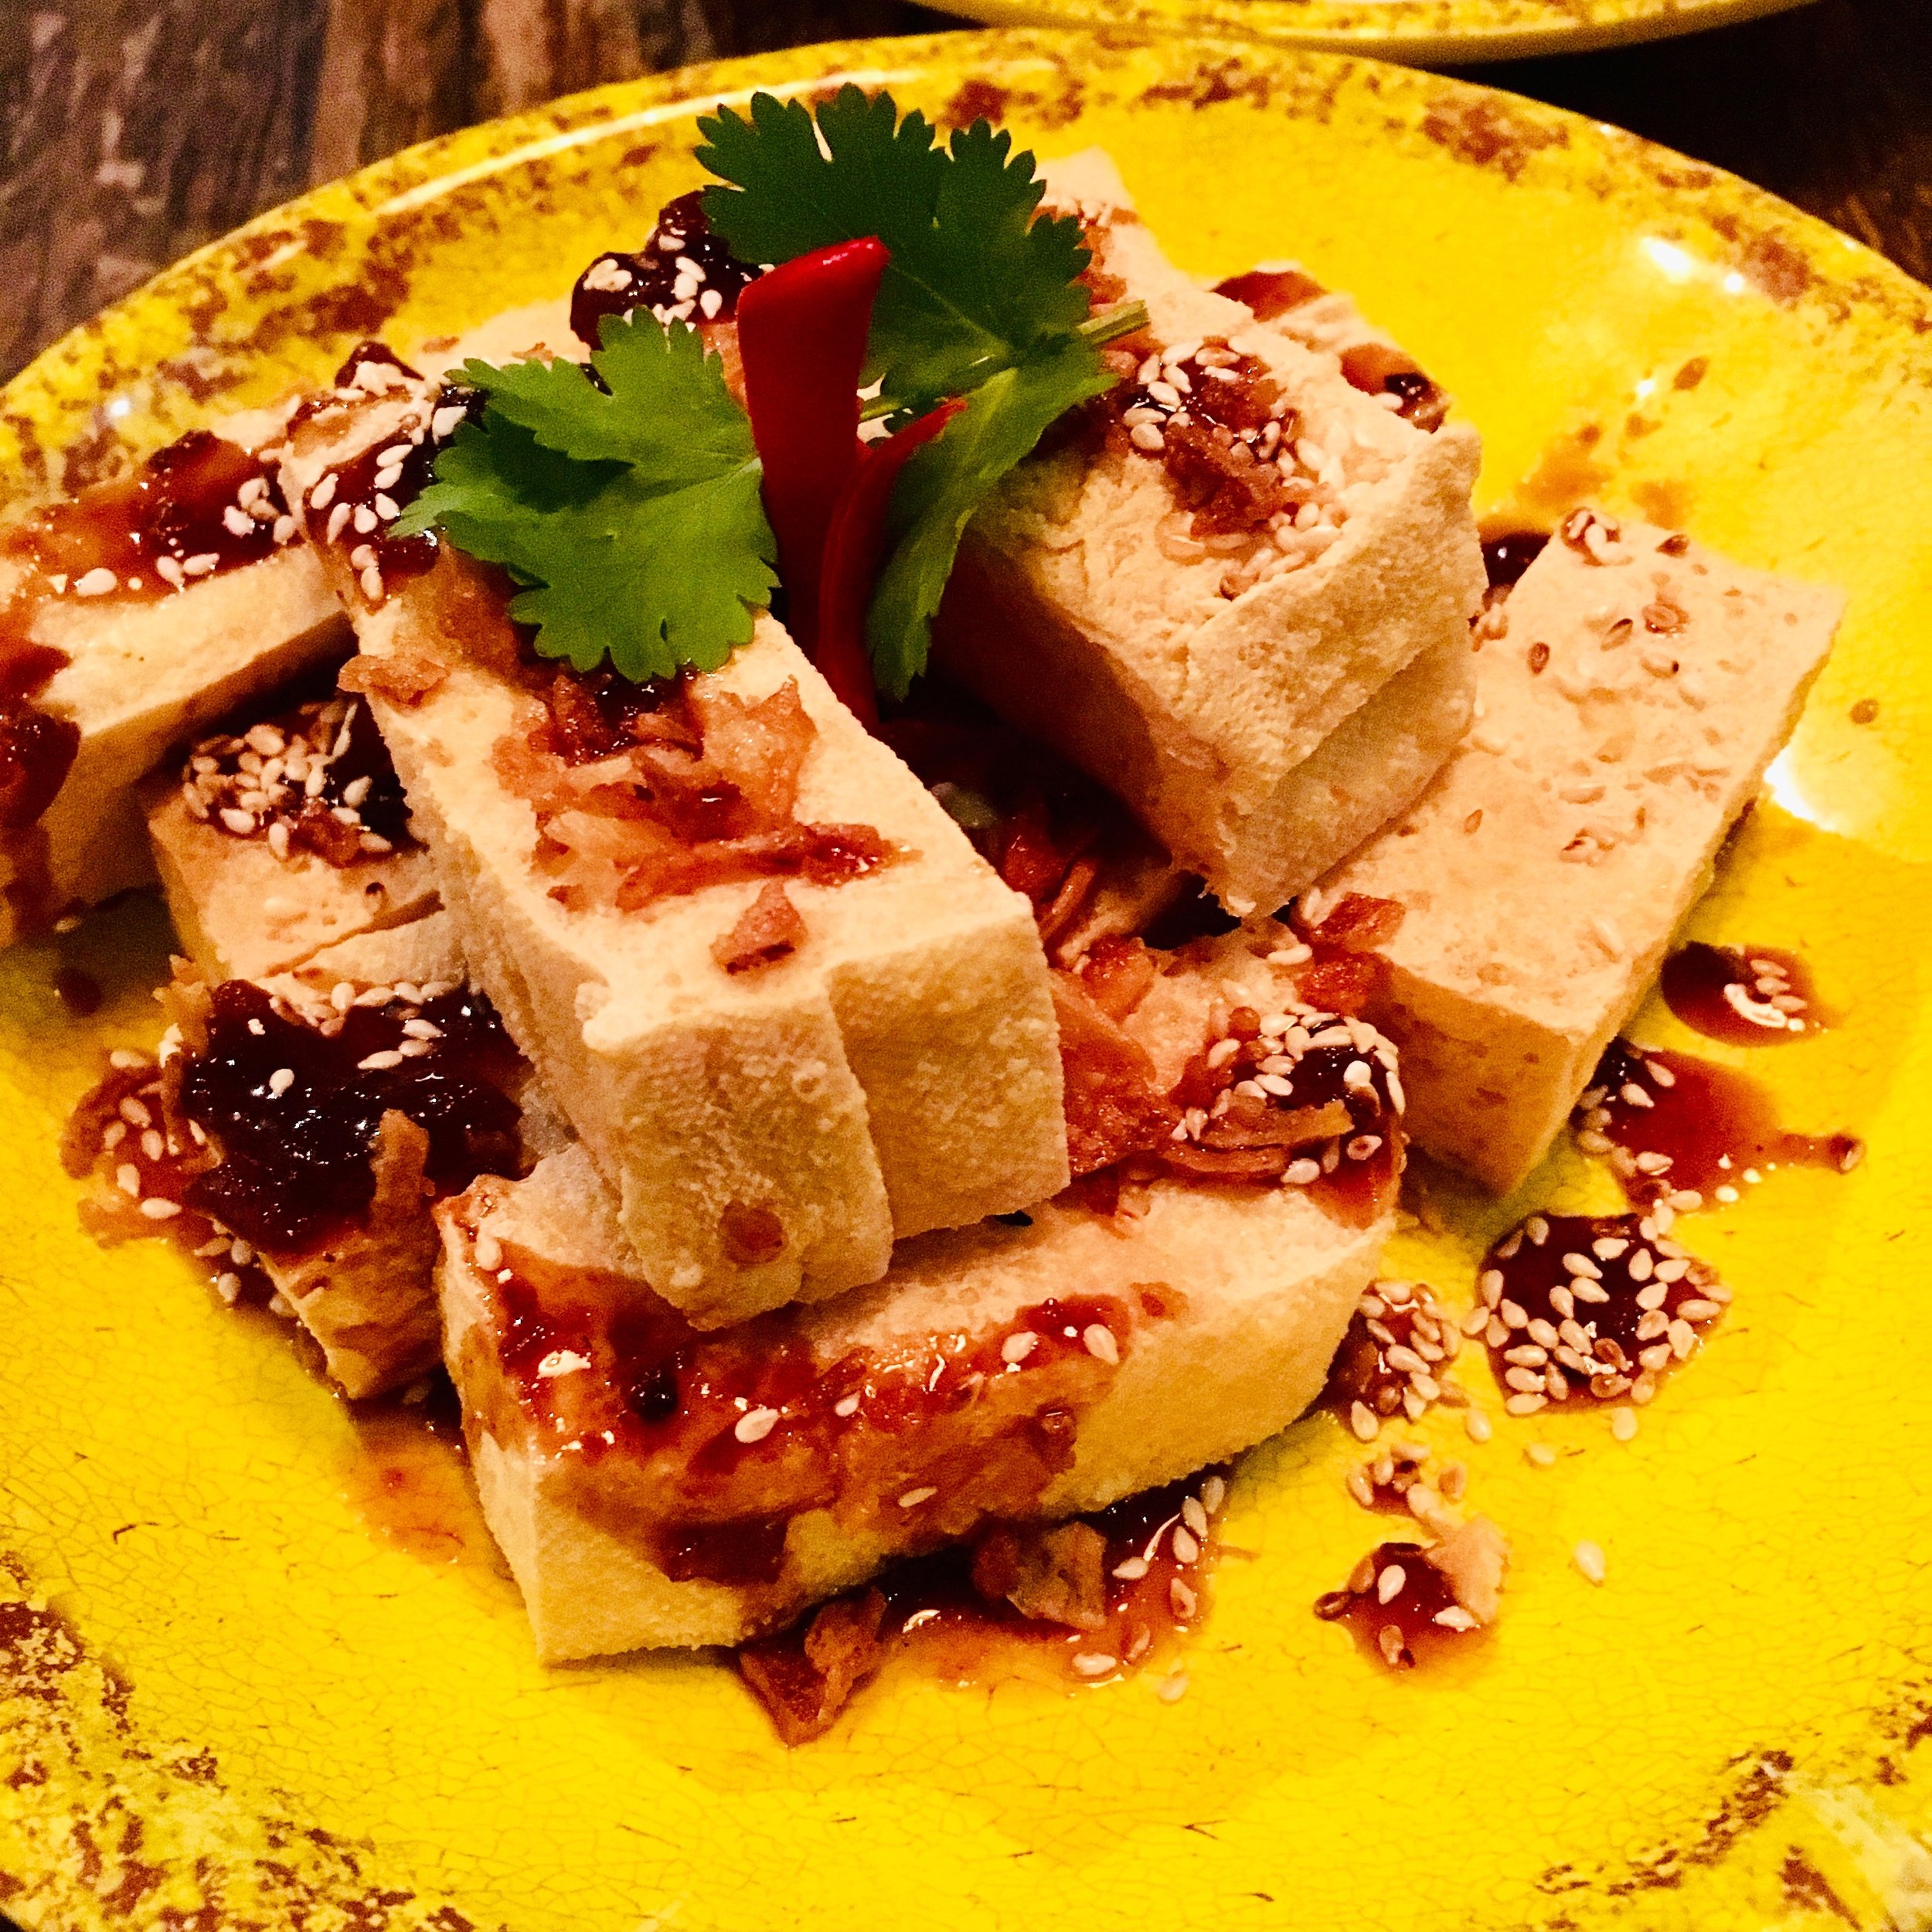 Fried Tofu with tamarind sauce at Rosa's Thai Cafe, West Hampstead